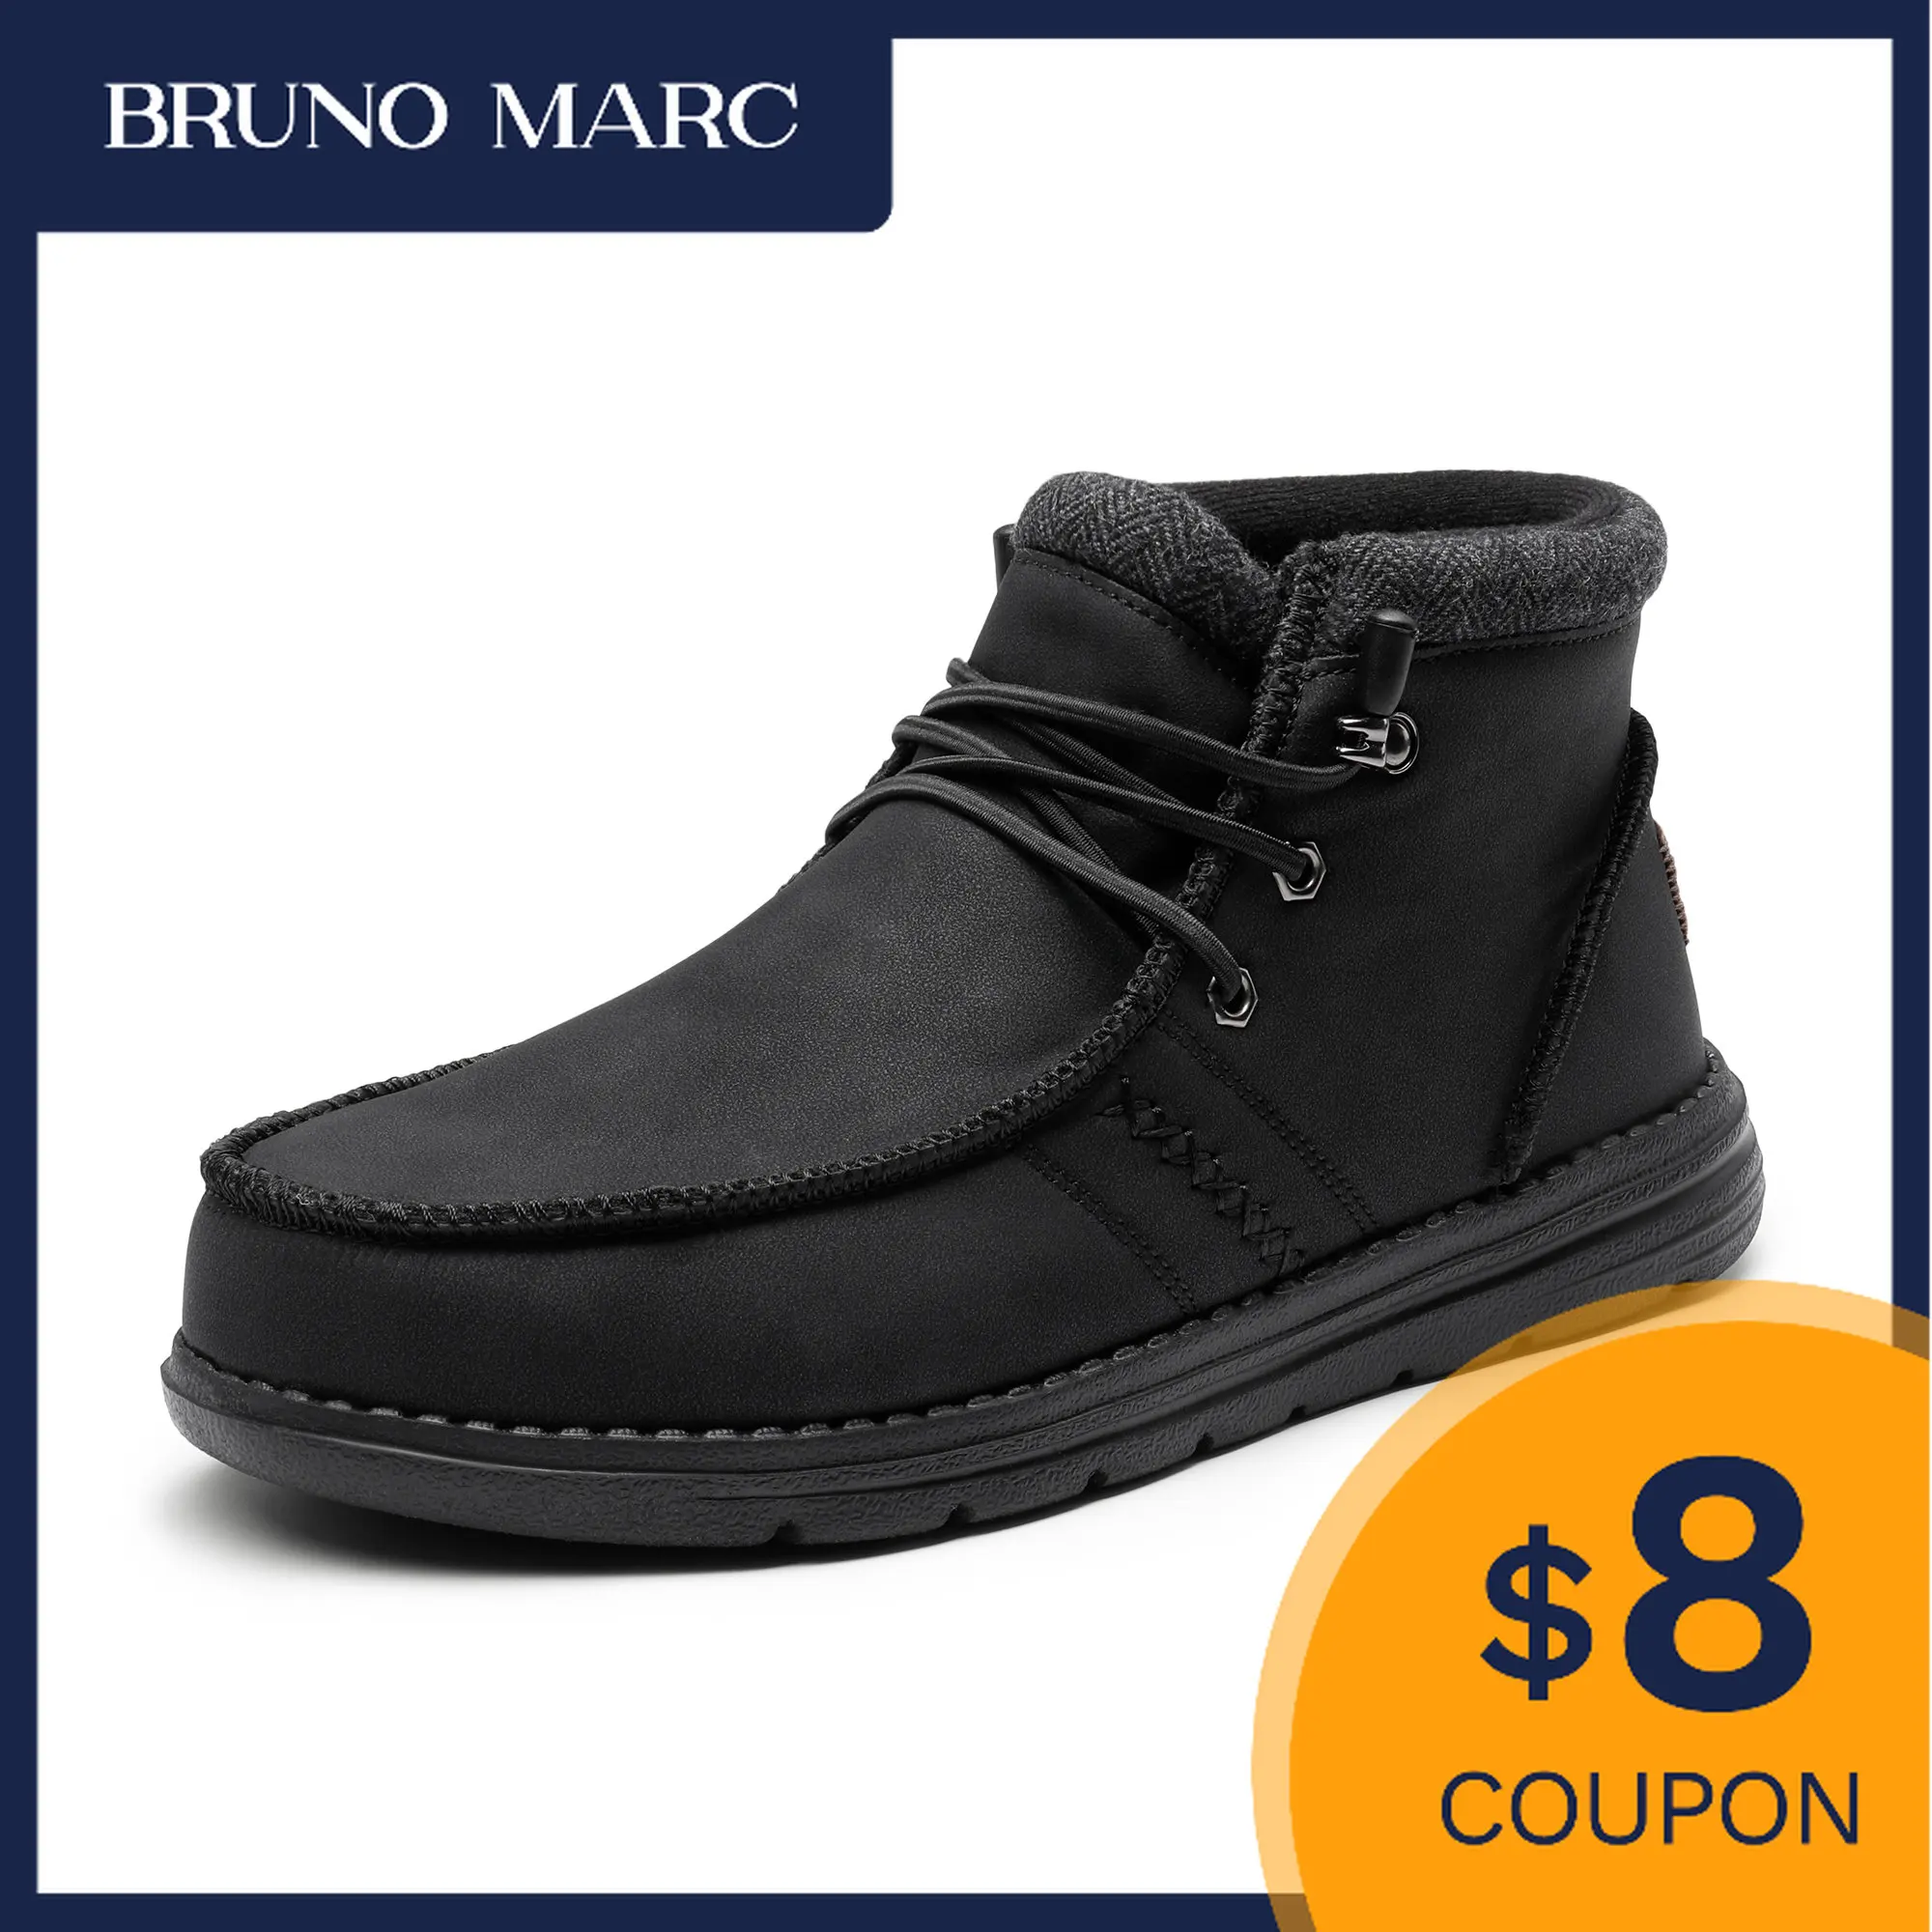 

Bruno Marc Men's Loafers Winter Shoes Warm for Men Boots Casual Slip-on Platform Boots ANKLE EVA Faux Suede Basic Boots